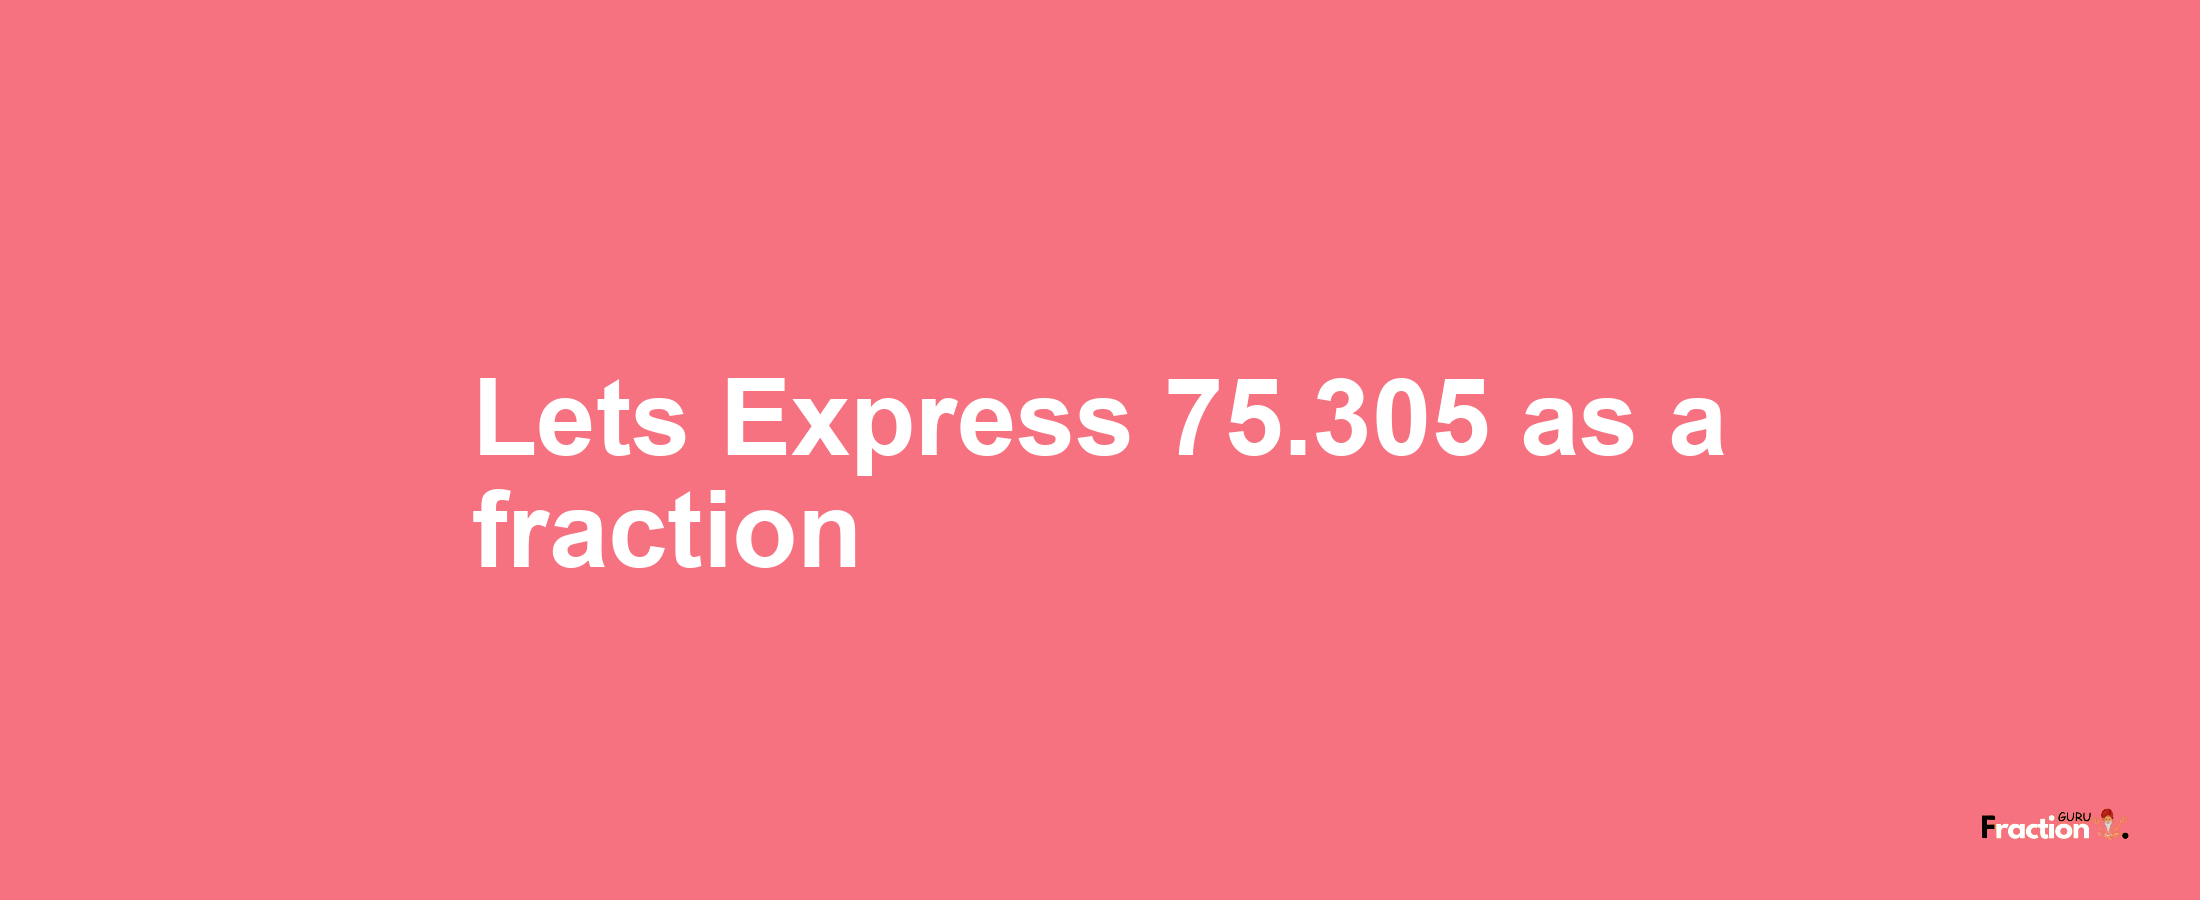 Lets Express 75.305 as afraction